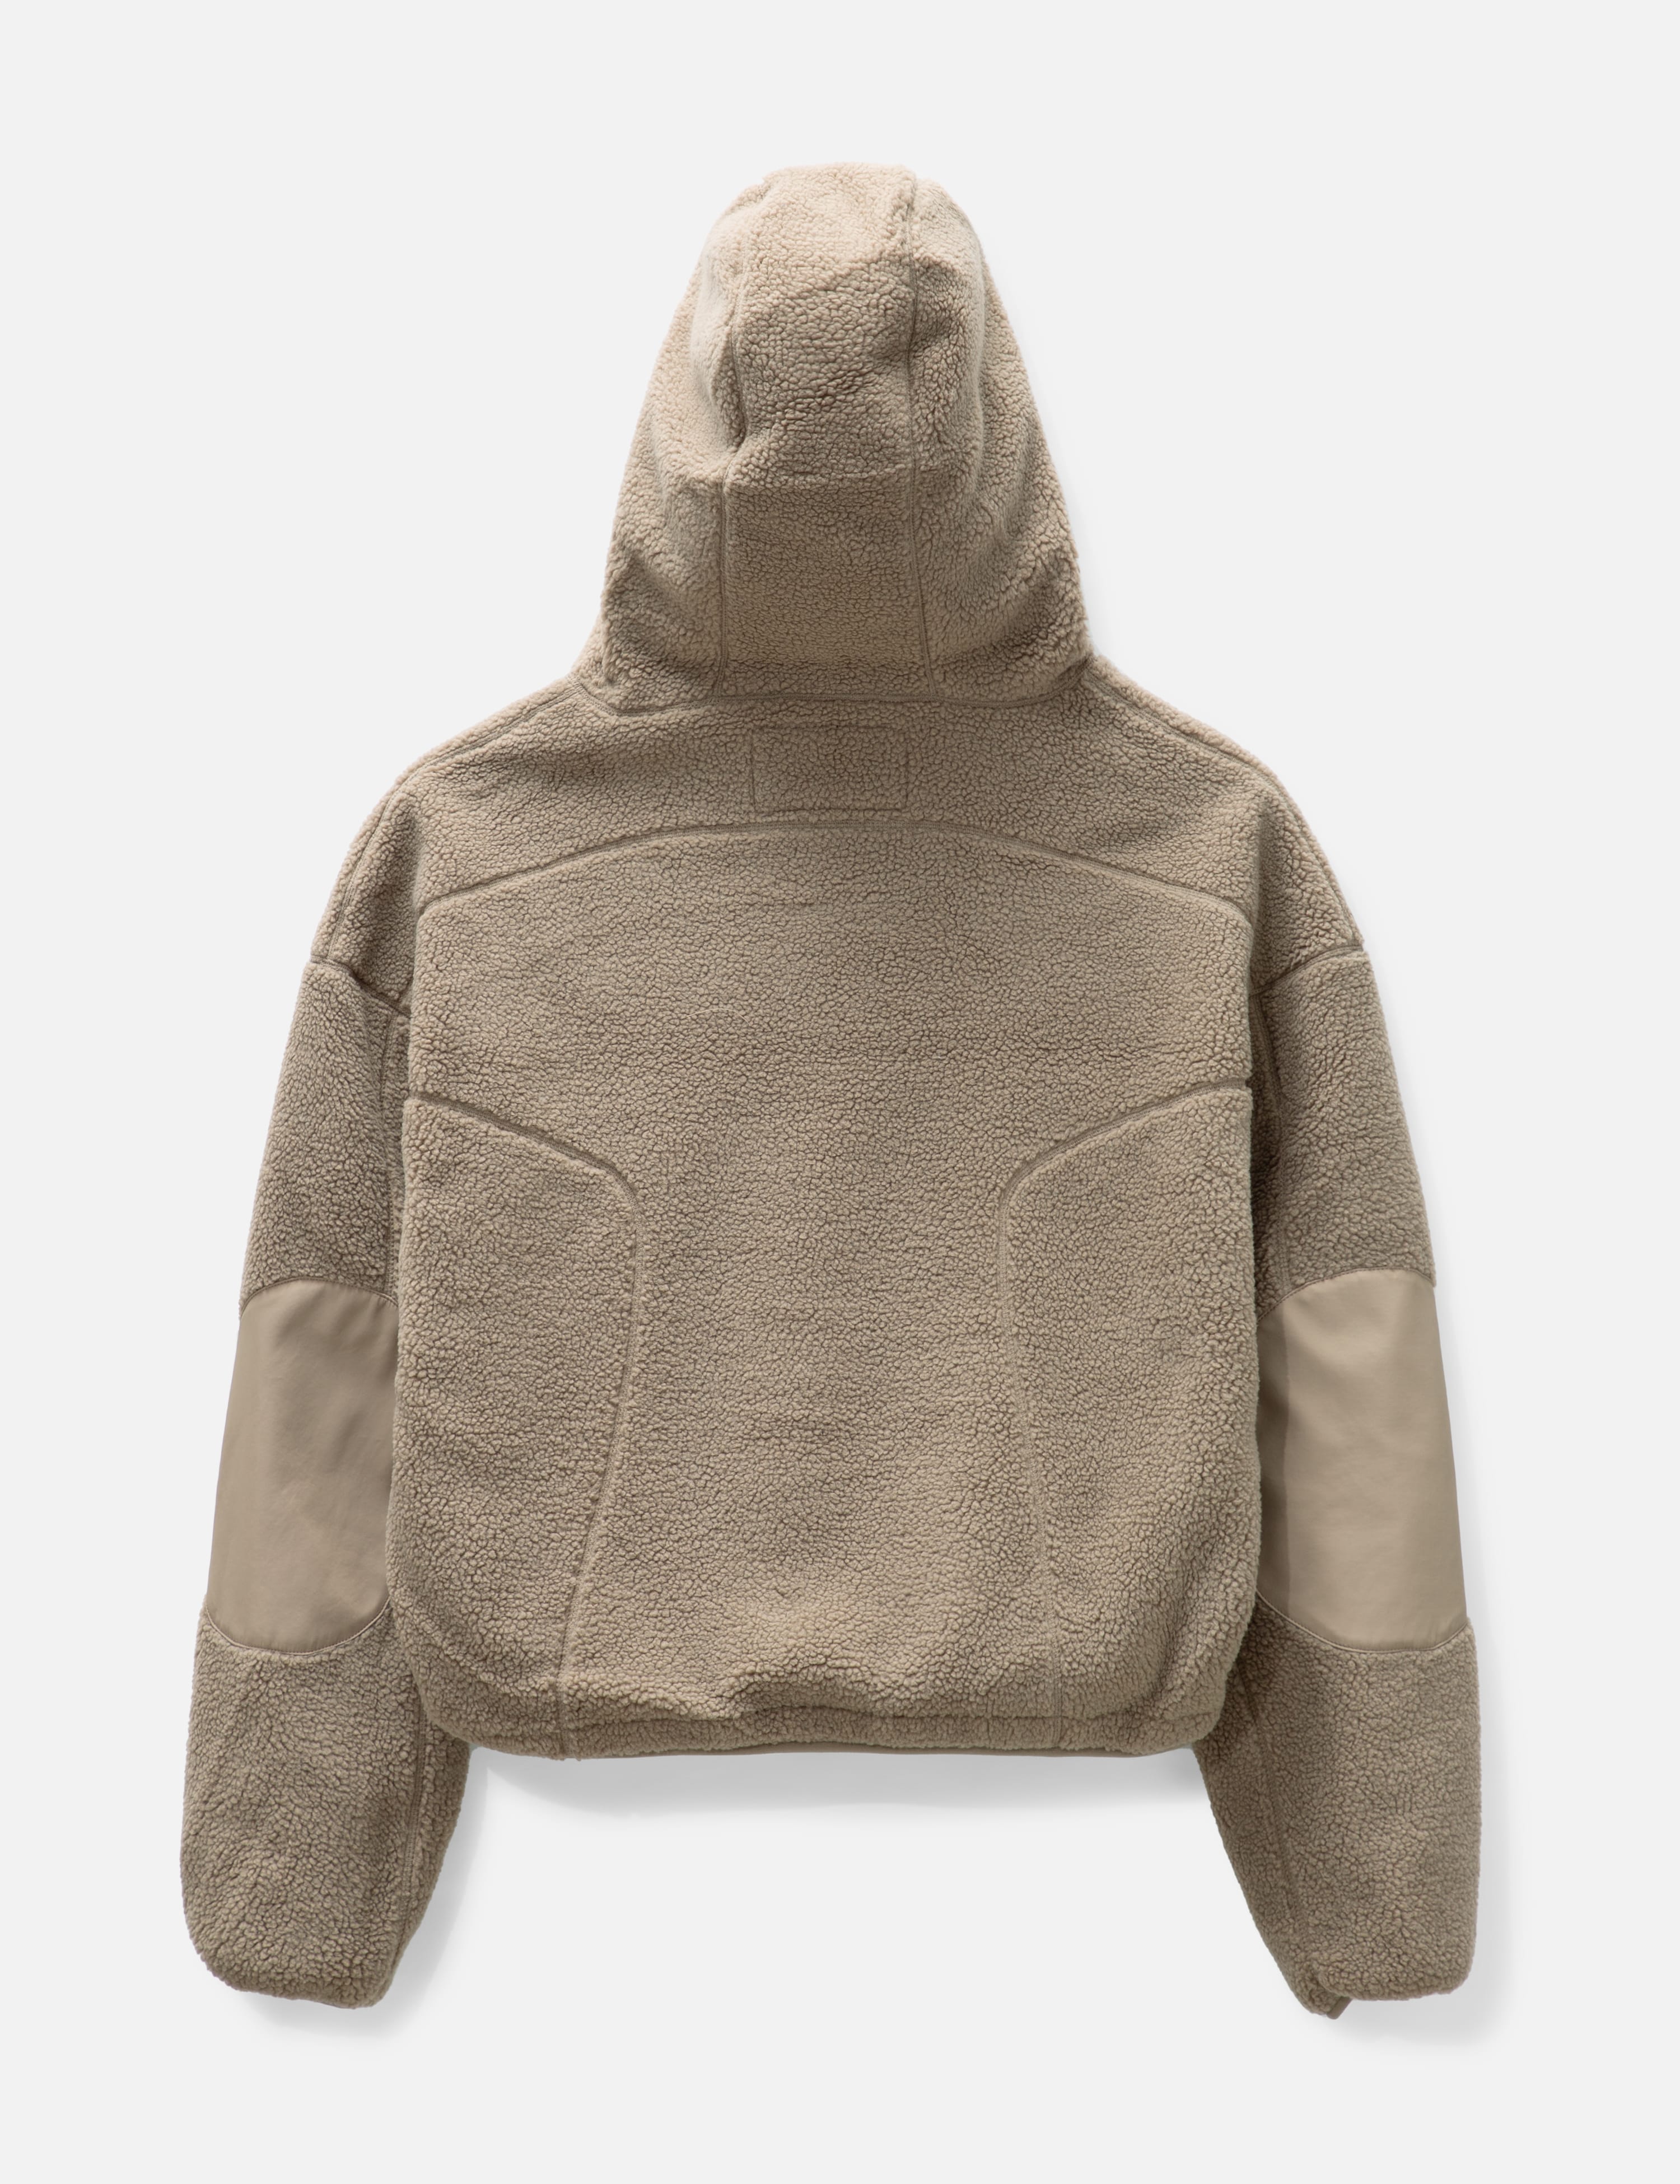 Entire Studios - Fluffy Fleece V2 Hoodie | HBX - Globally Curated